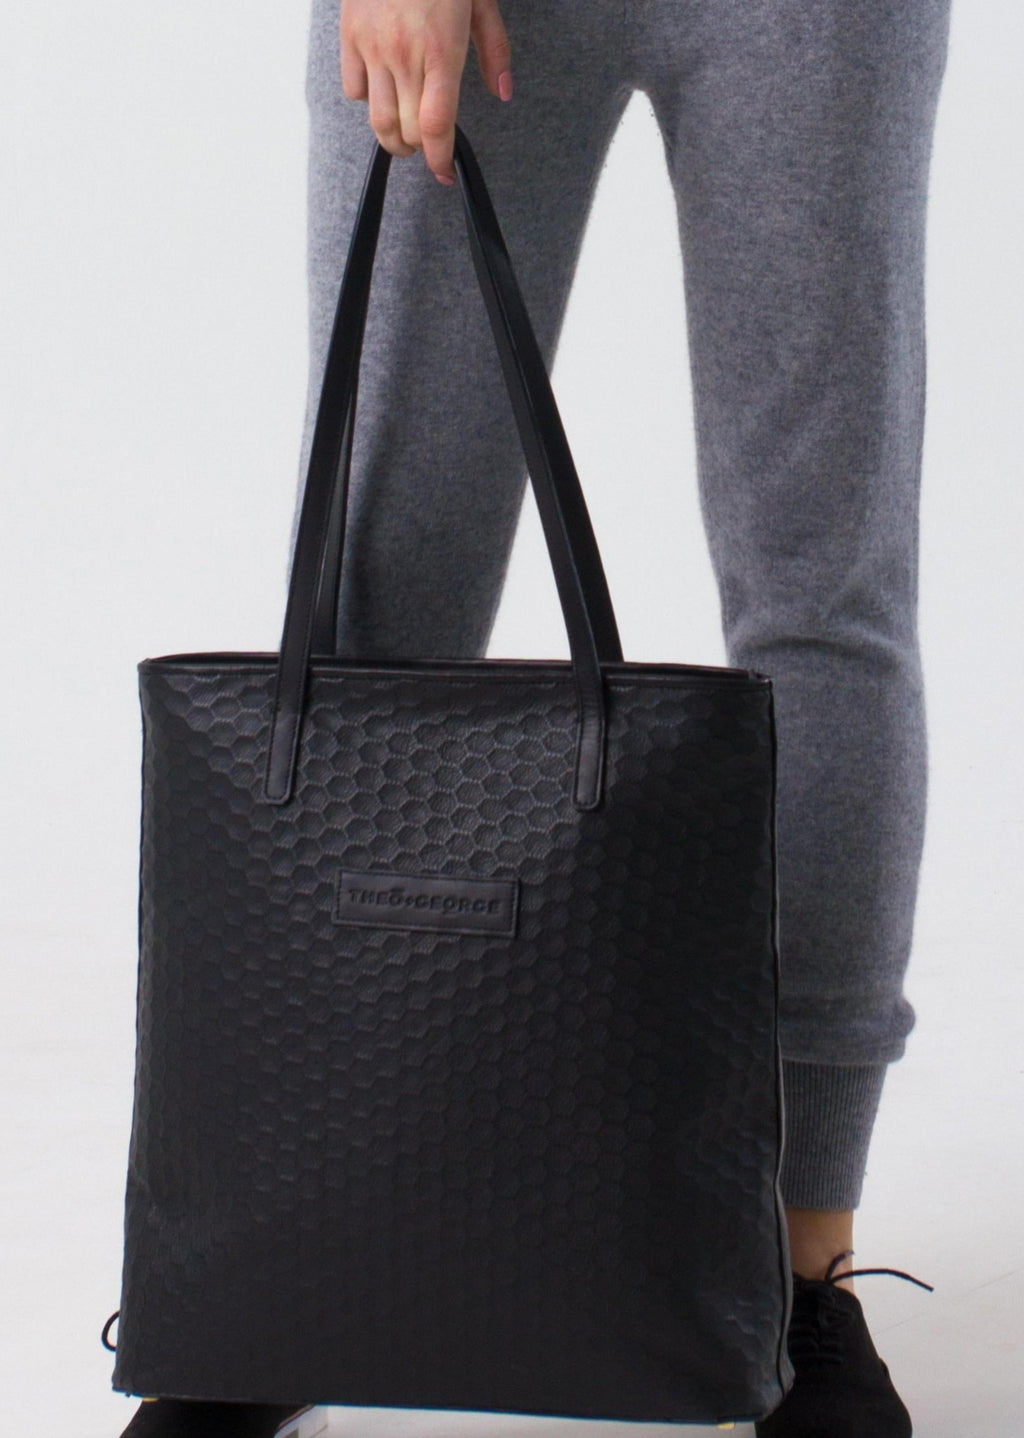 Design George | Theo Bag | Theo + Tote – George Sustainable and